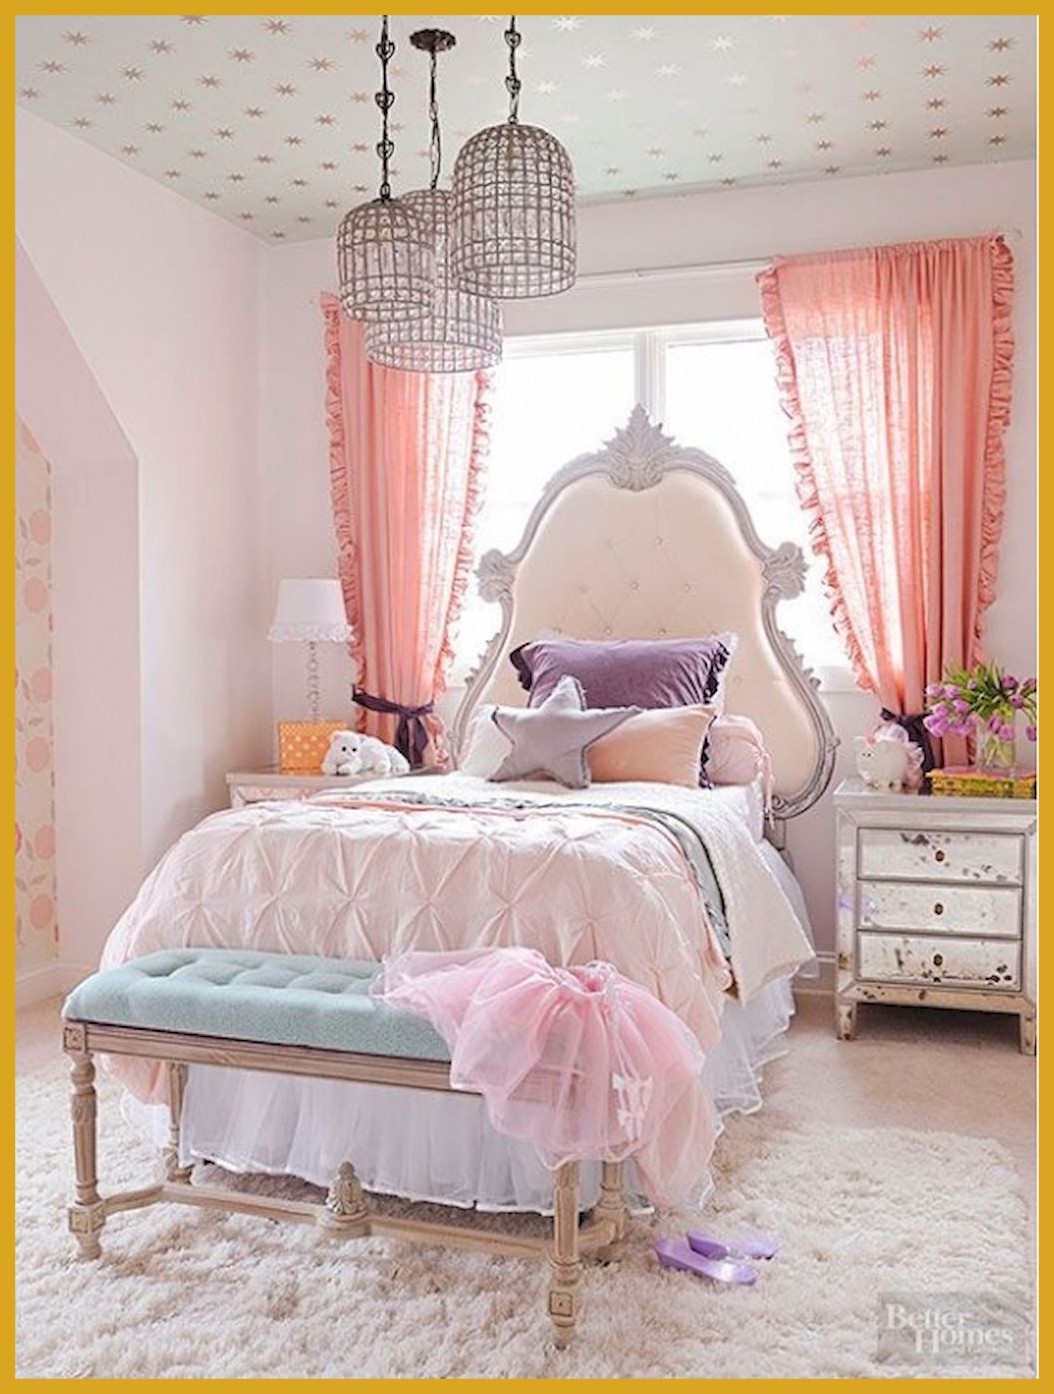 marvelous-nice-pretty-unicorn-bedroom-ideas-for-kid-rooms-https-picture-decor-concept-and-bathroom-decorations-inspiration-1533698744343856595033